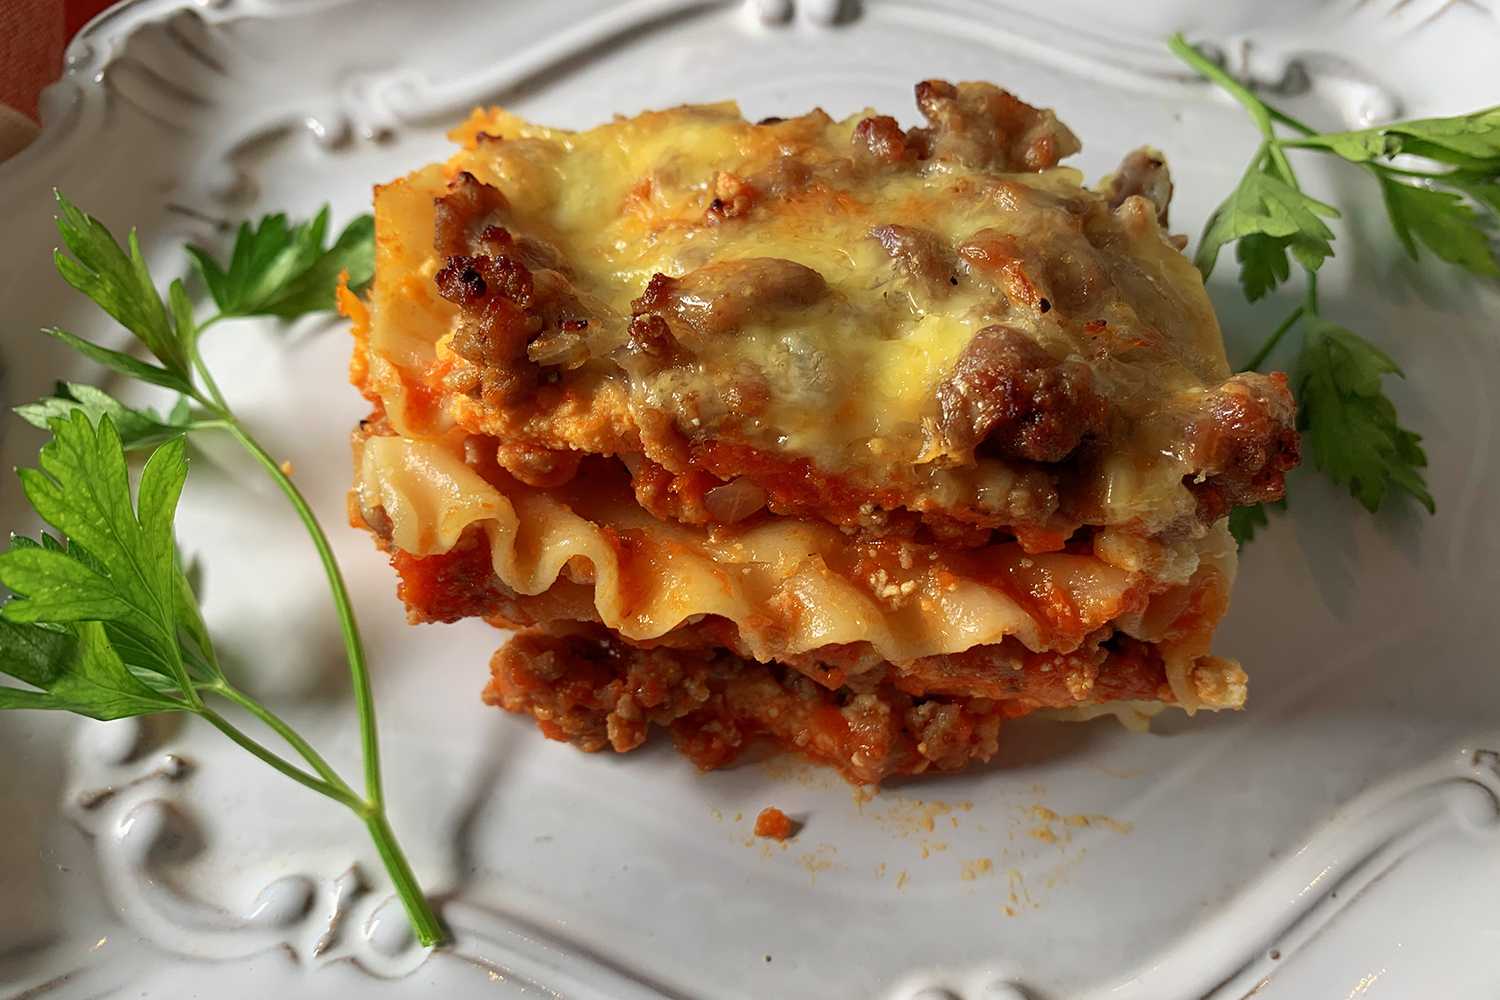 Lasagna slice with ground beef and tomato sauce topped with melted cheese with parsley on side